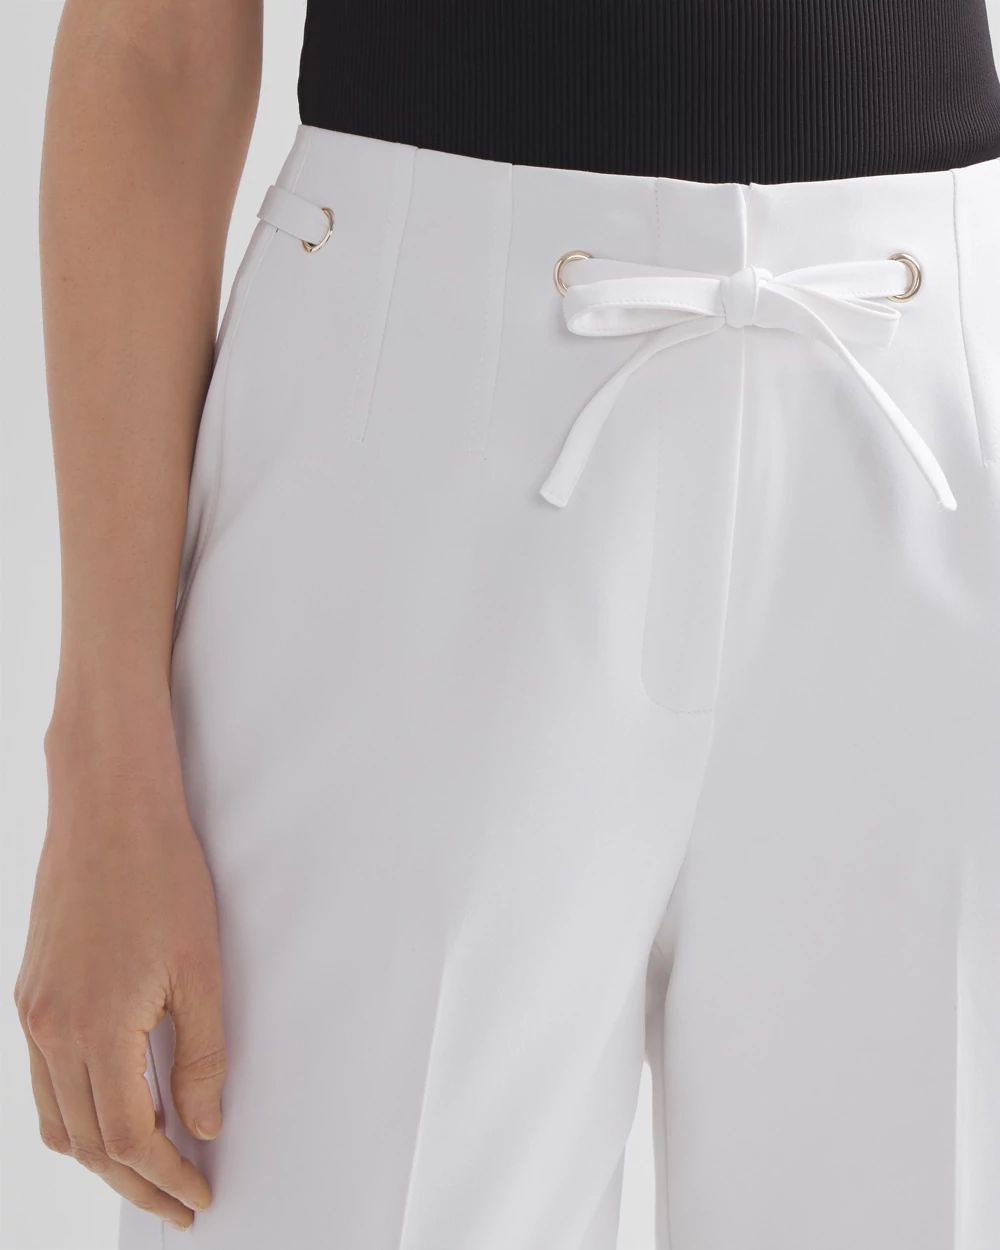 Grommet Tapered Ankle Pants click to view larger image.